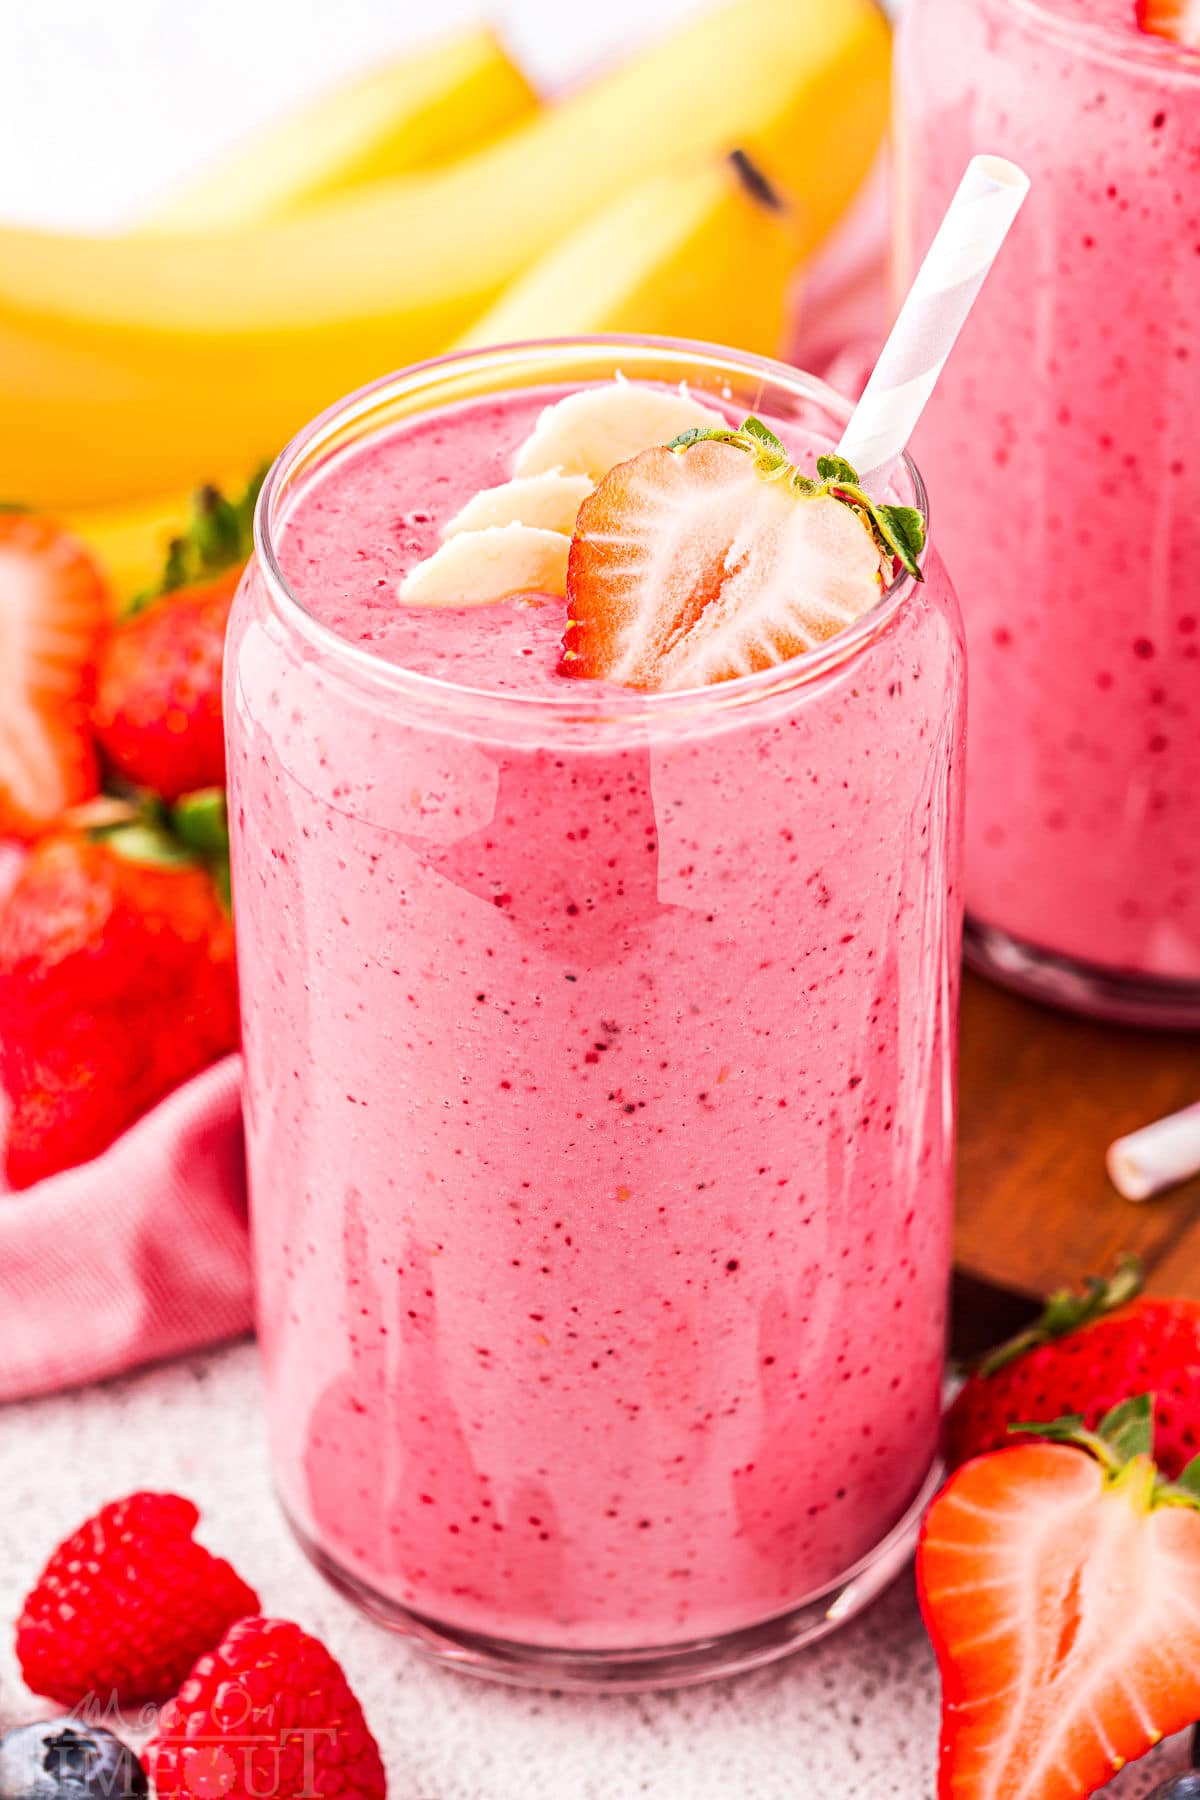 strawberry banana smoothie recipe in a tall glass with a pink and white striped straw. bananas and strawberries can be seen in the background.